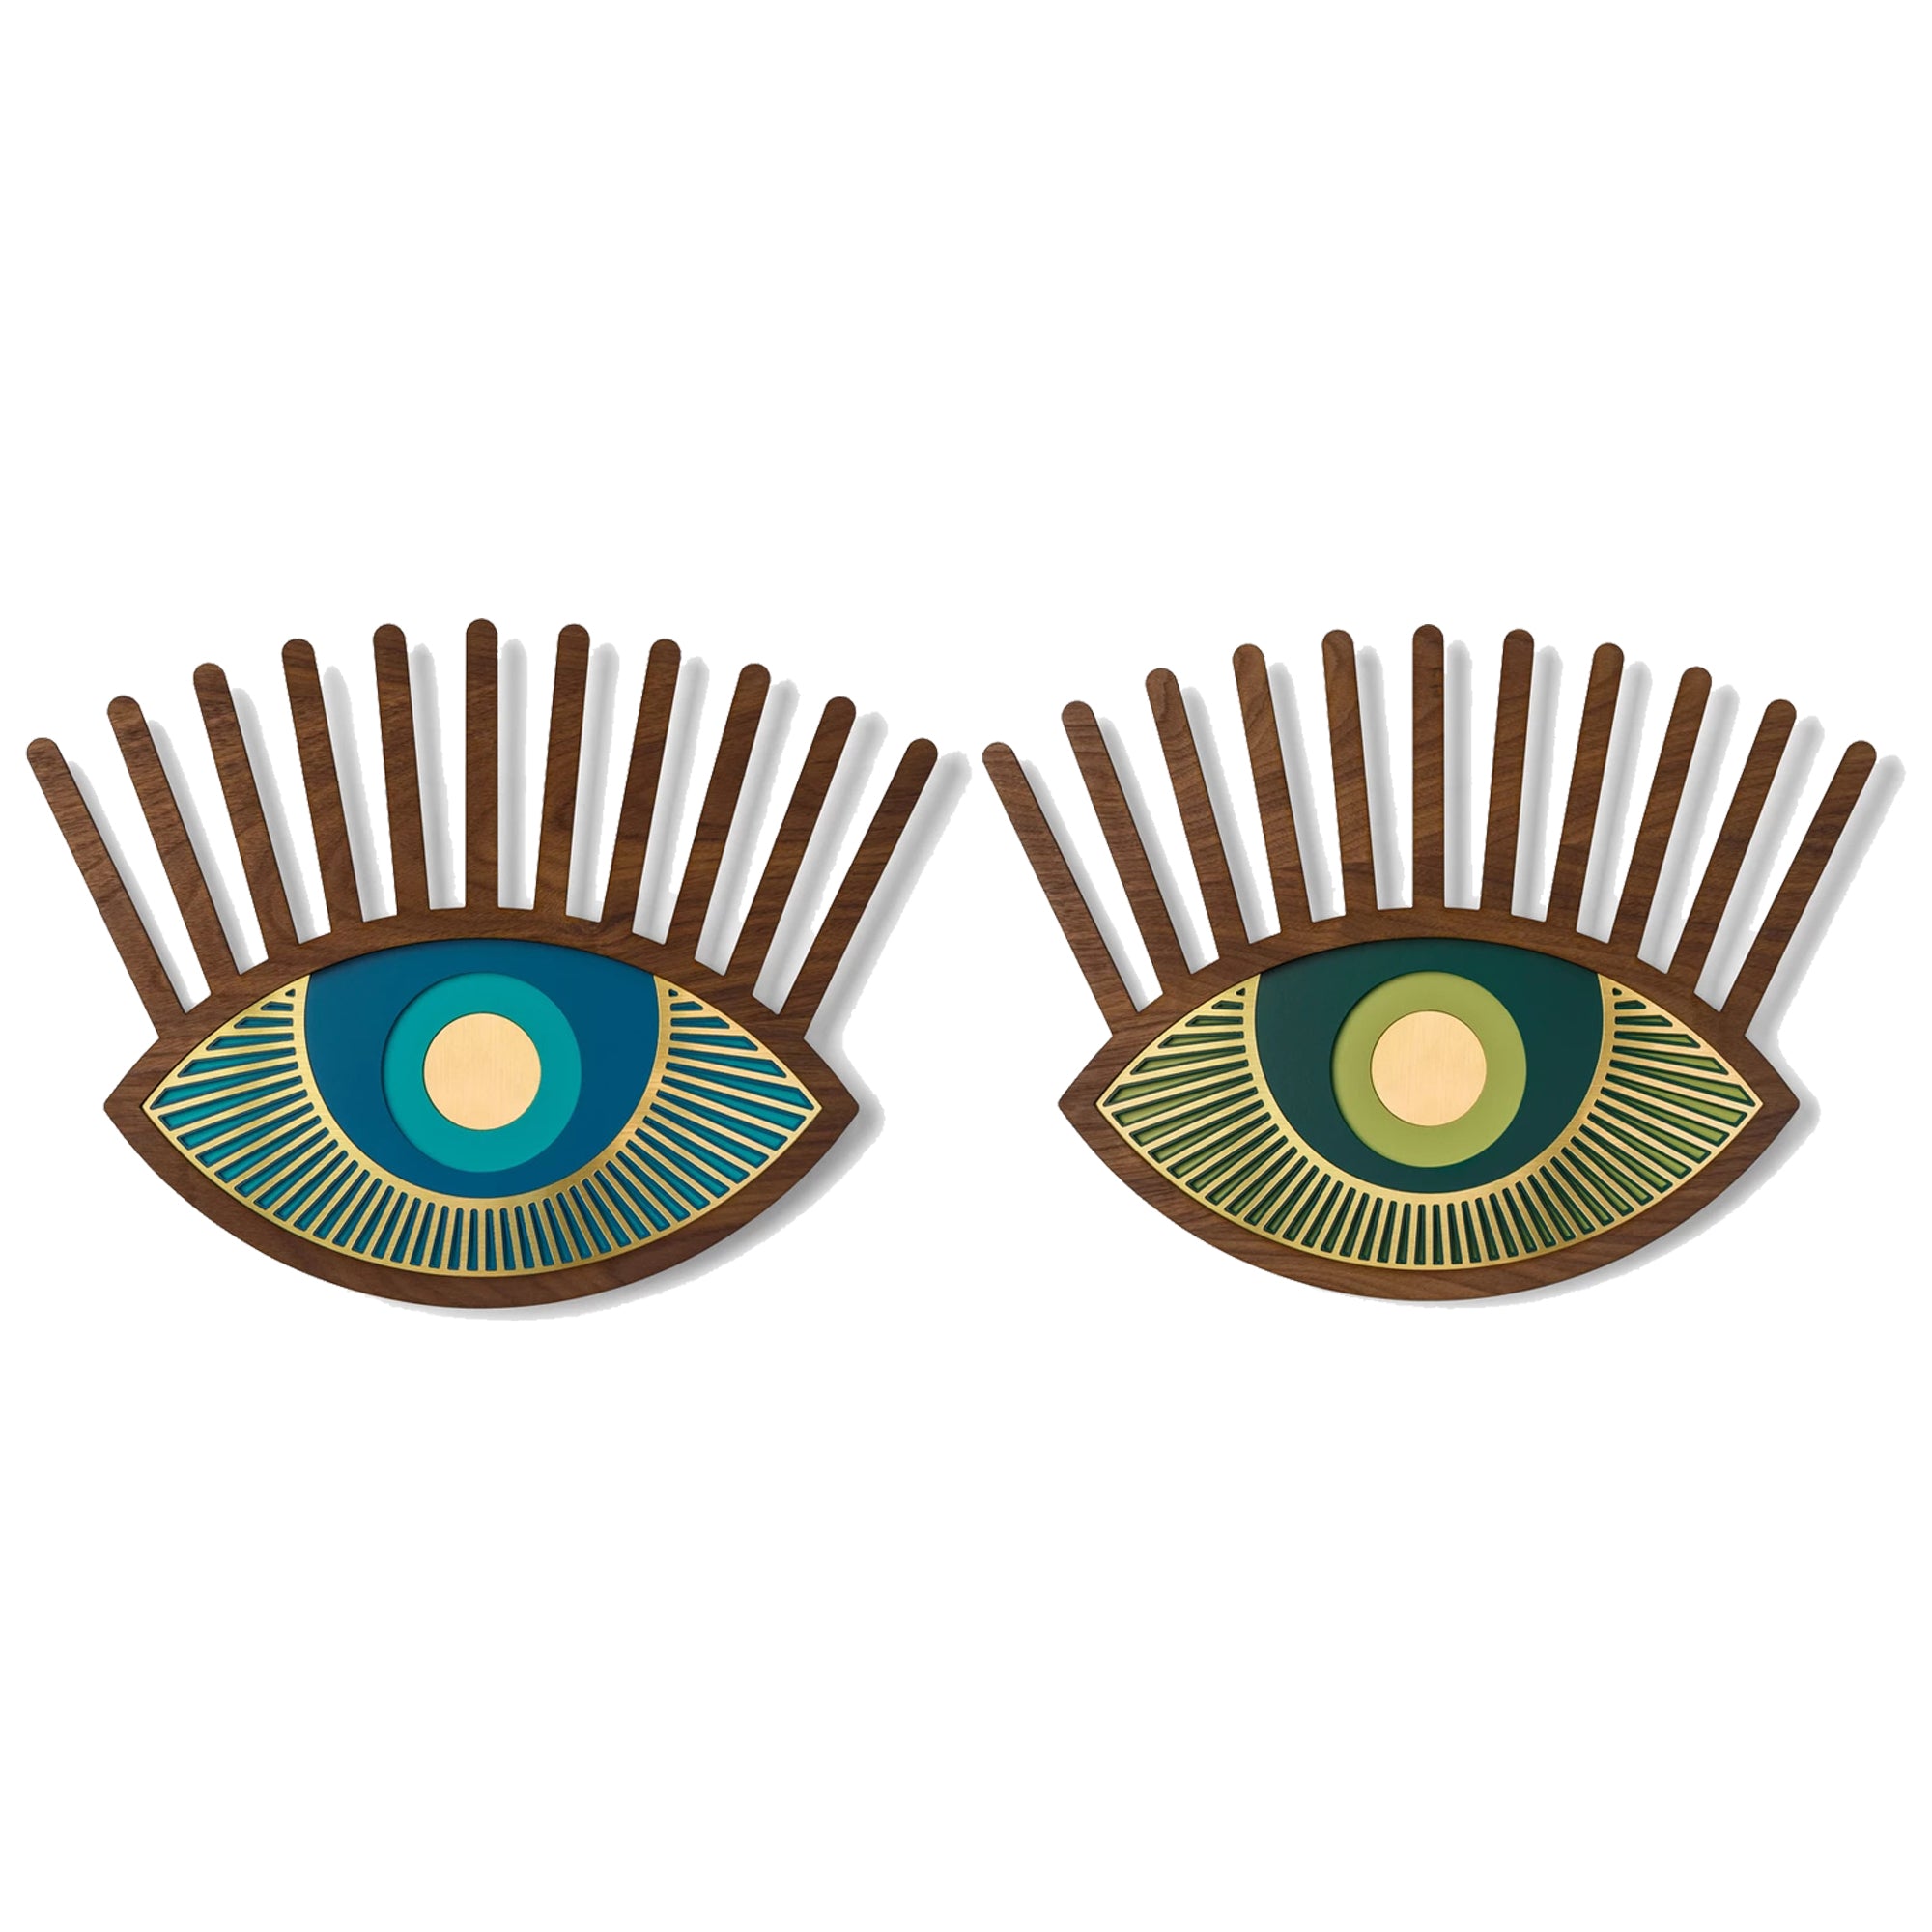 Green and Blue Eyes Wall Decor with Carved Wood Wall Art inspired Contact Lenses